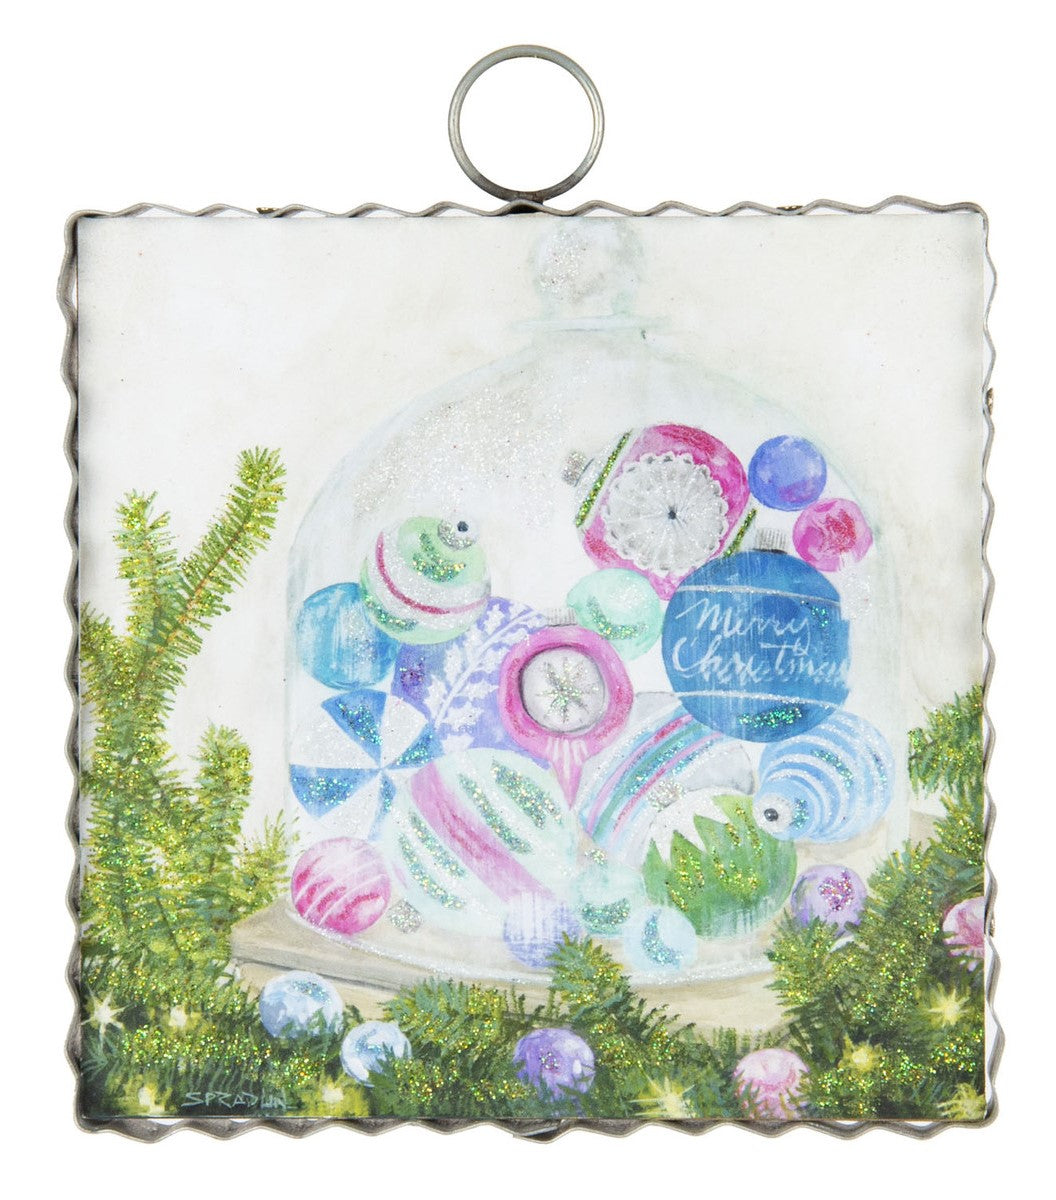 Vintage Ornament in Glass Dome Charm